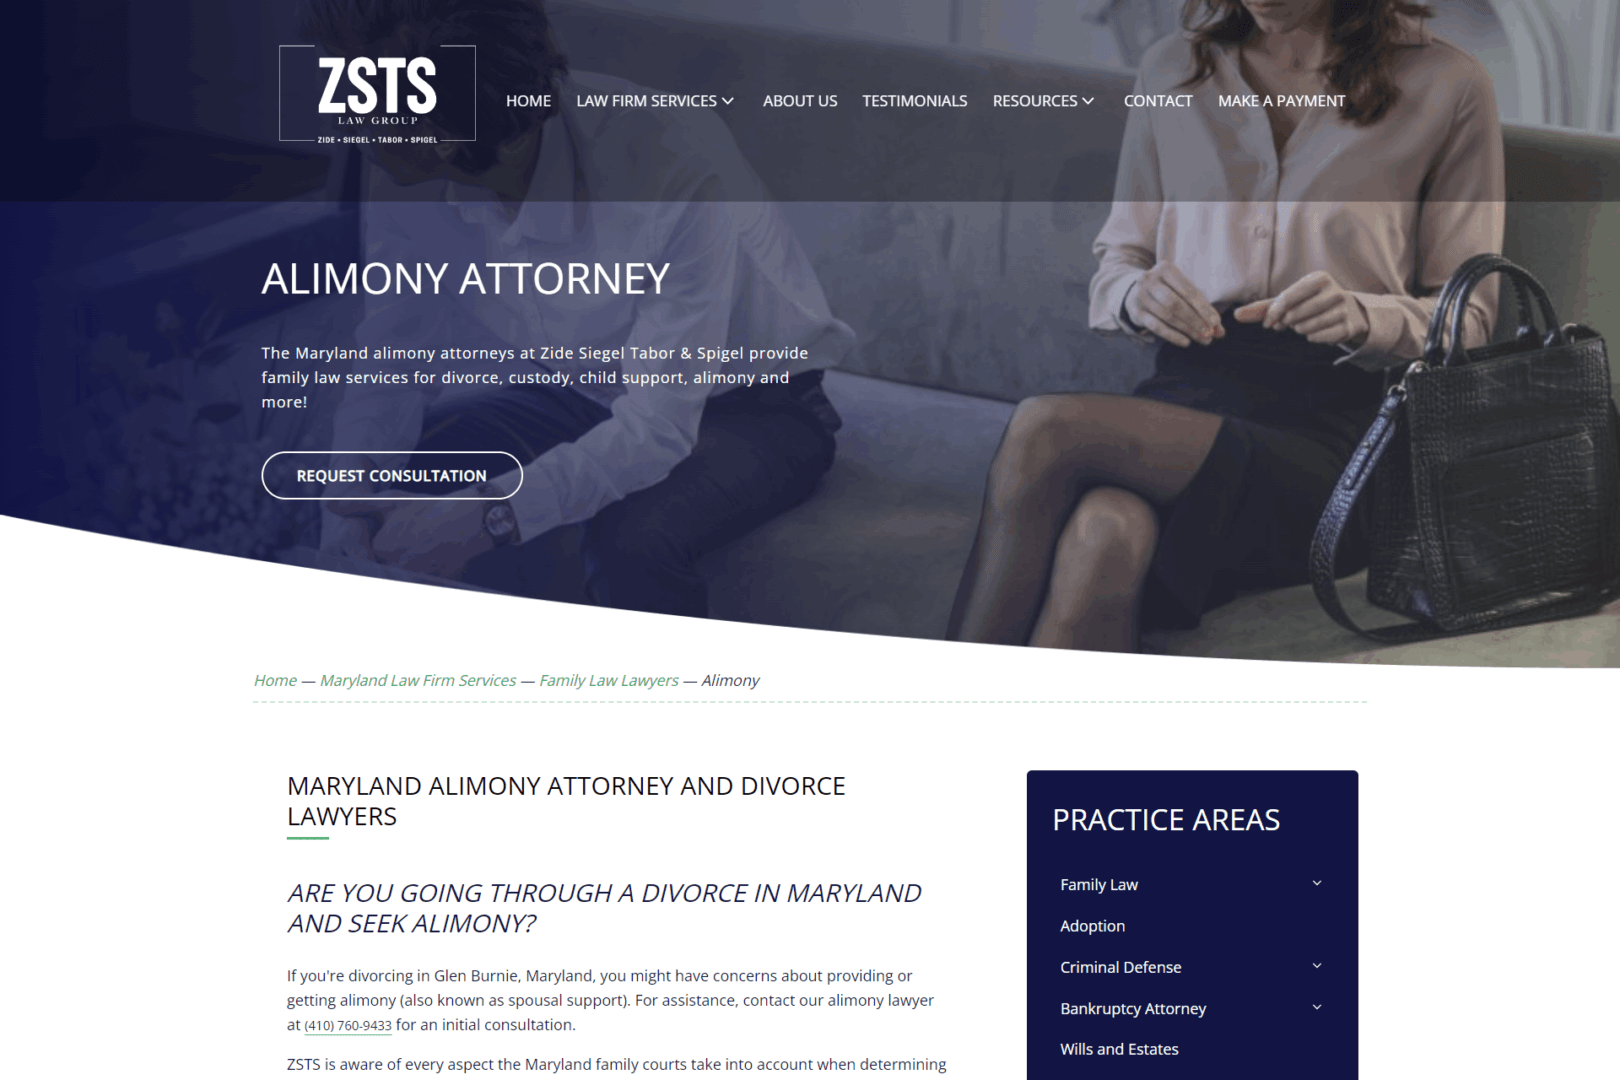 Alimony Attorney - Web Design For Family Lawyer